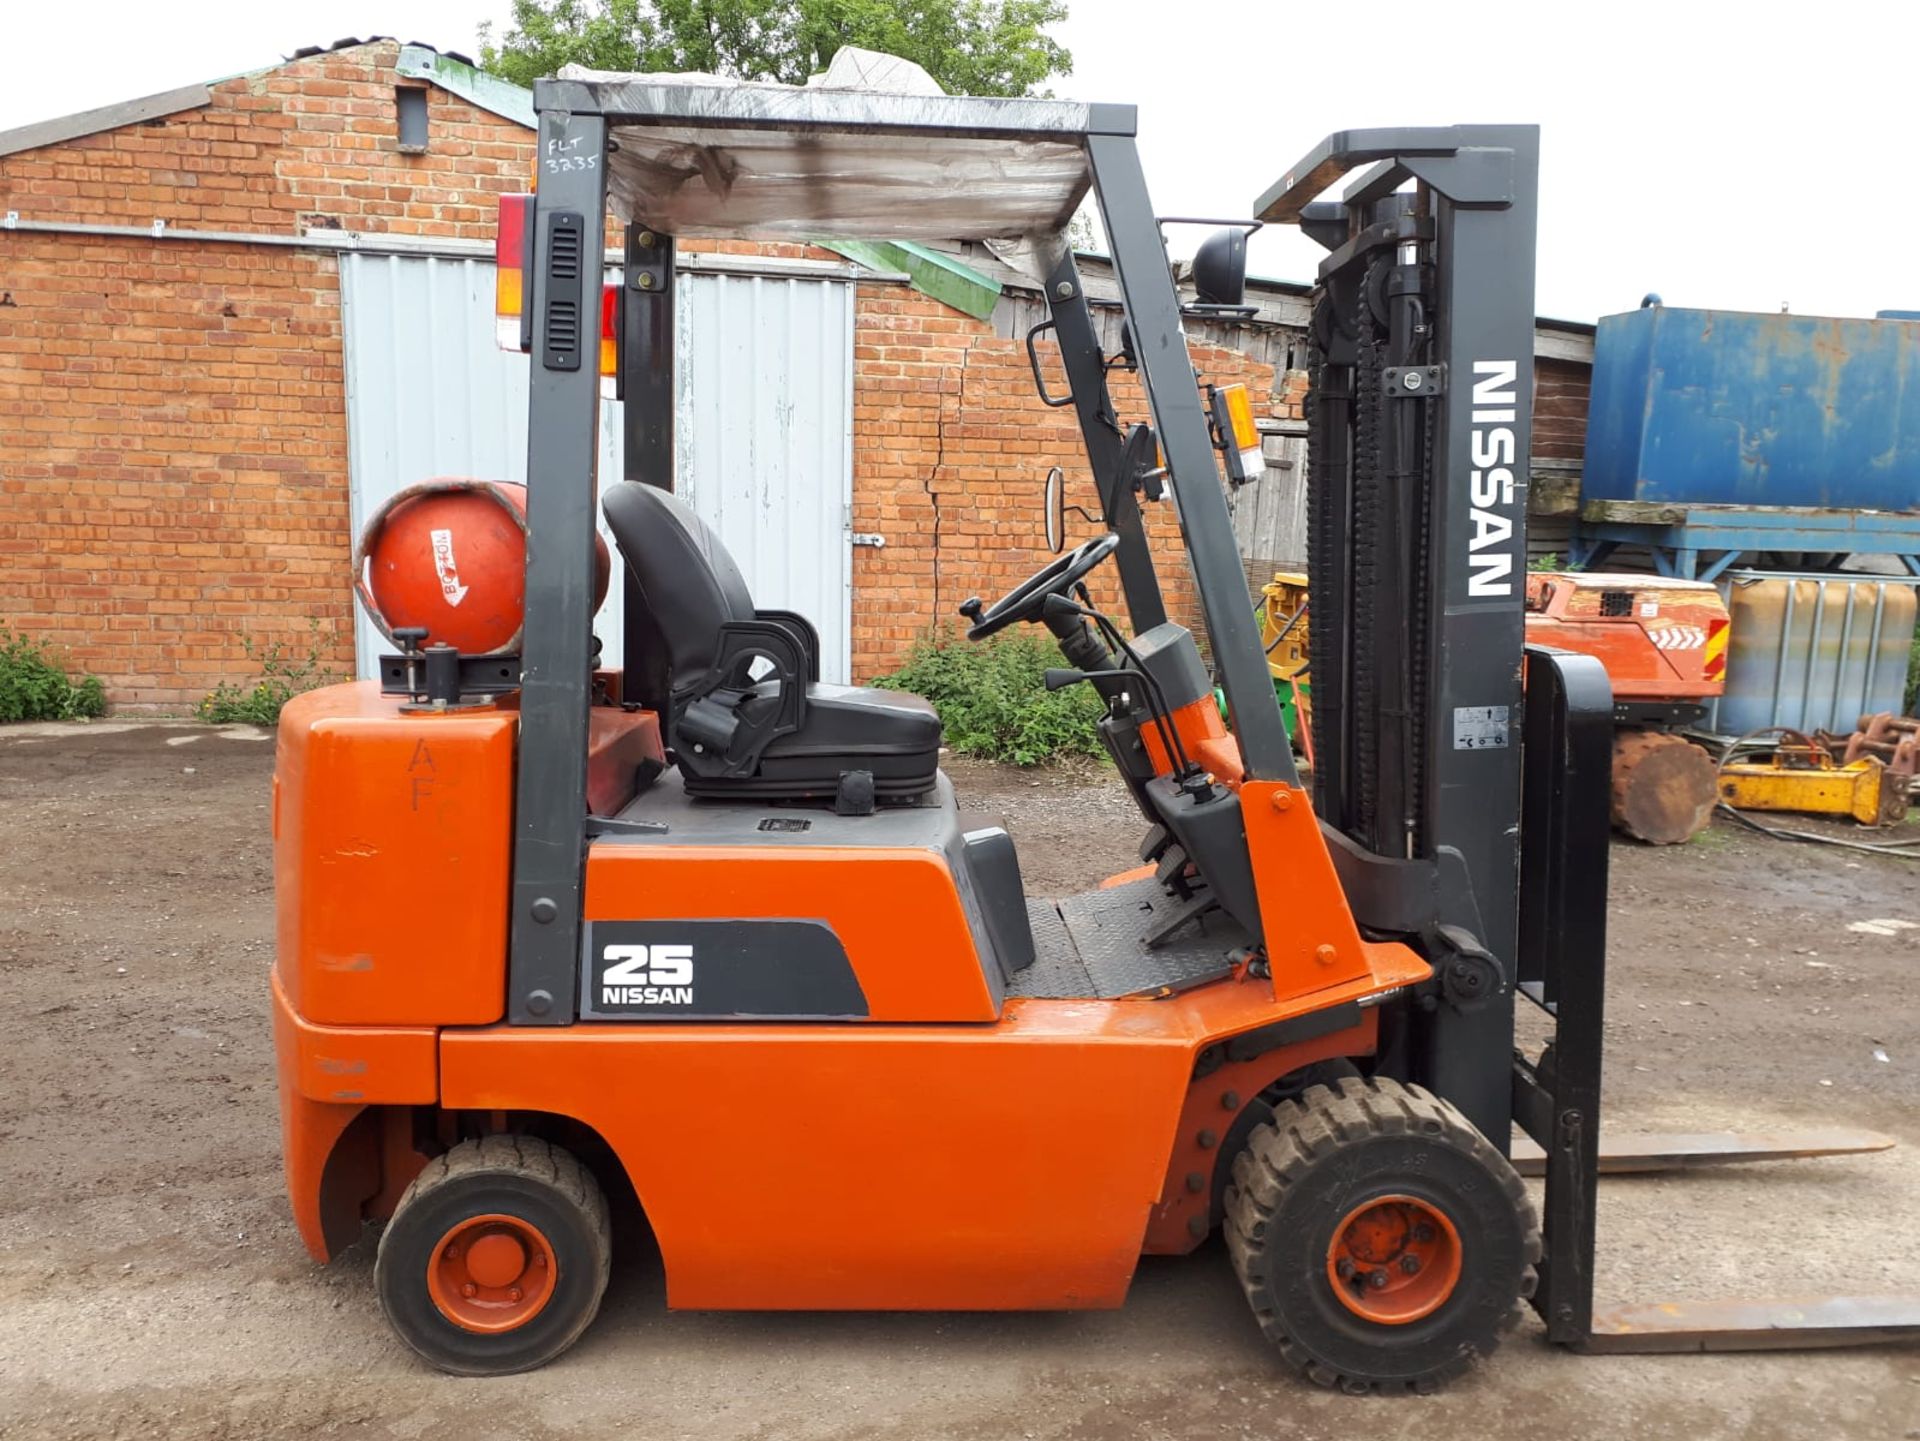 Nissan LPG Forklift Duplex Clear View Mast Low Hours - Image 2 of 8